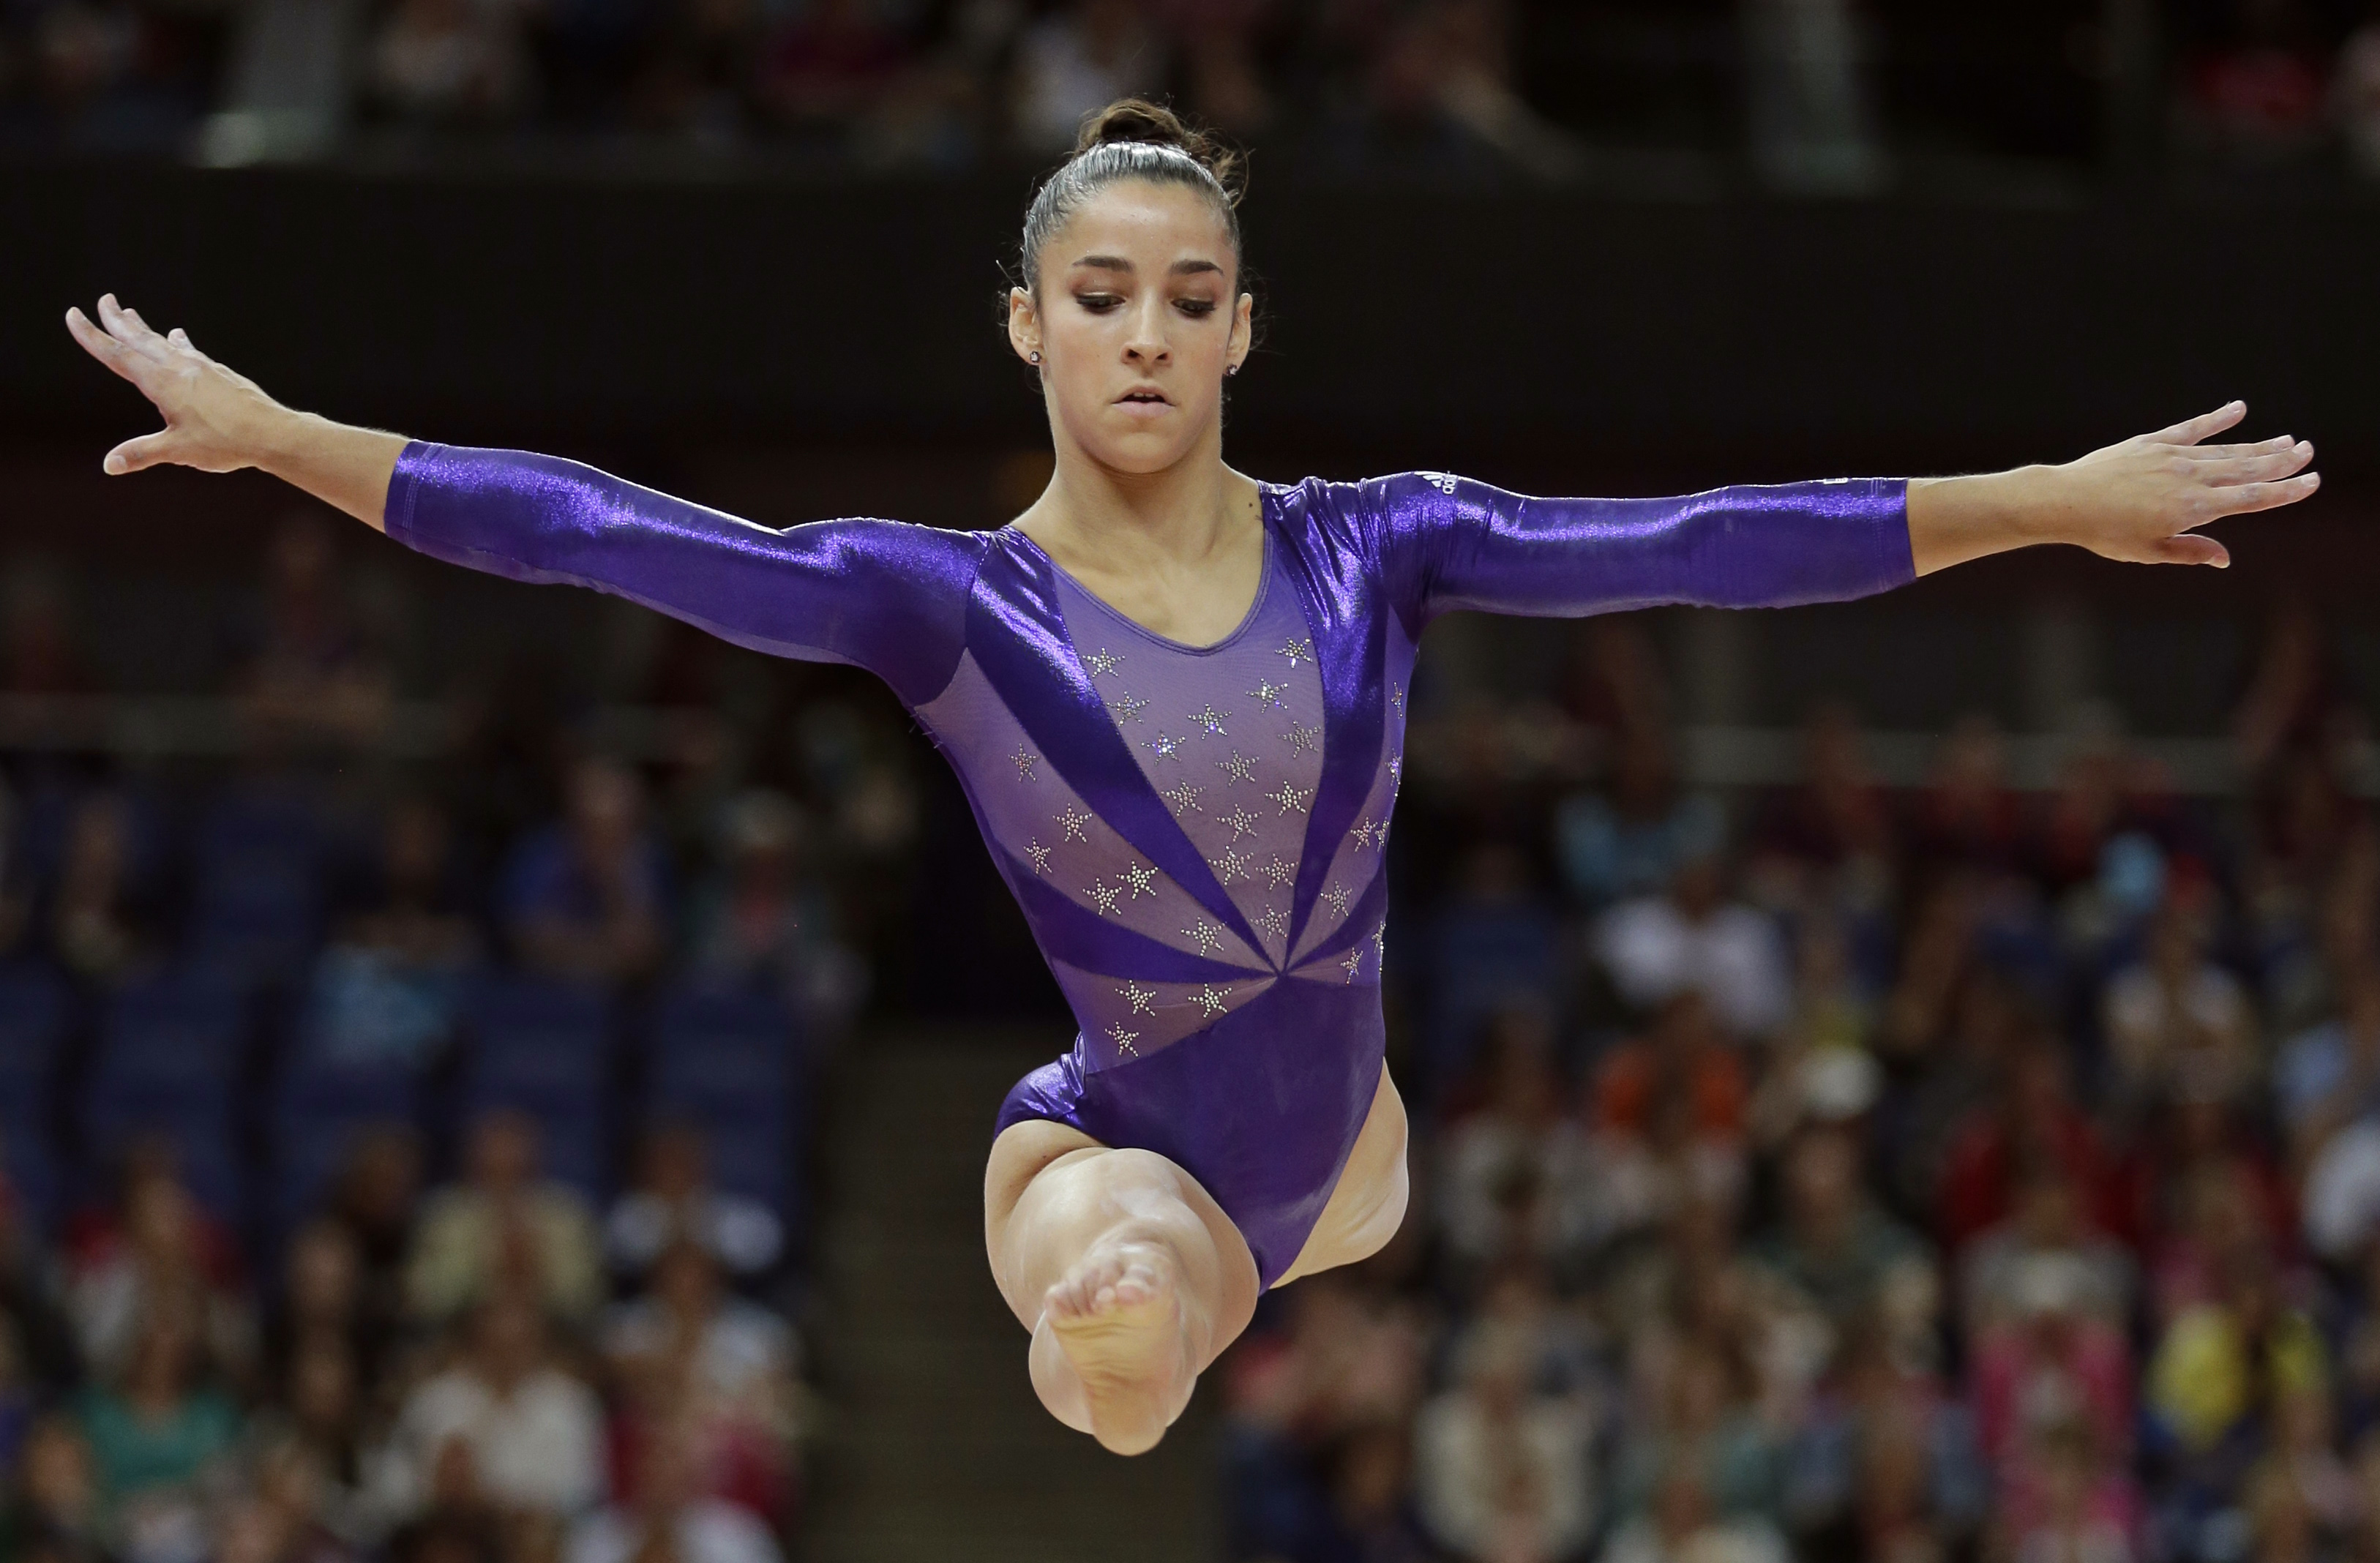 German gymnasts full-body suit takes stand against 